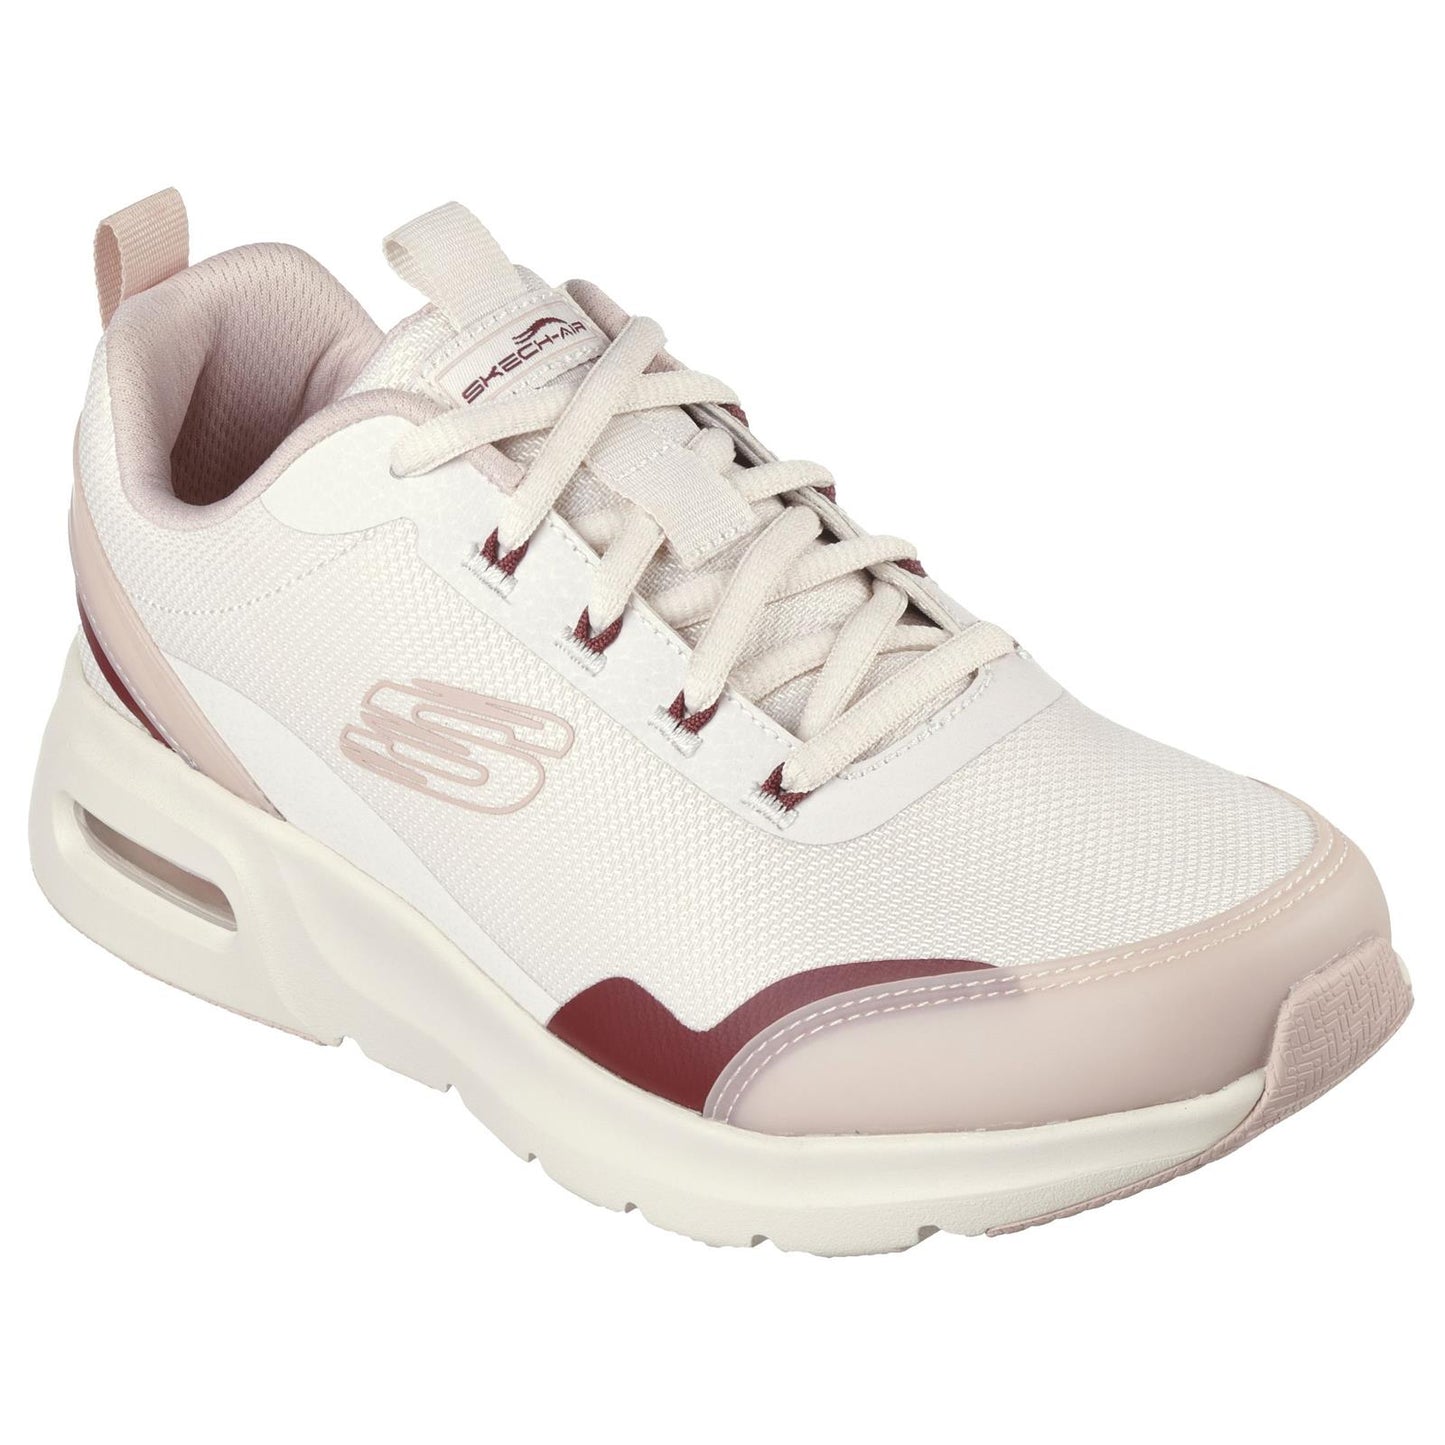 Skechers Skech-Air Court Pink Trainers 149945/LTPK